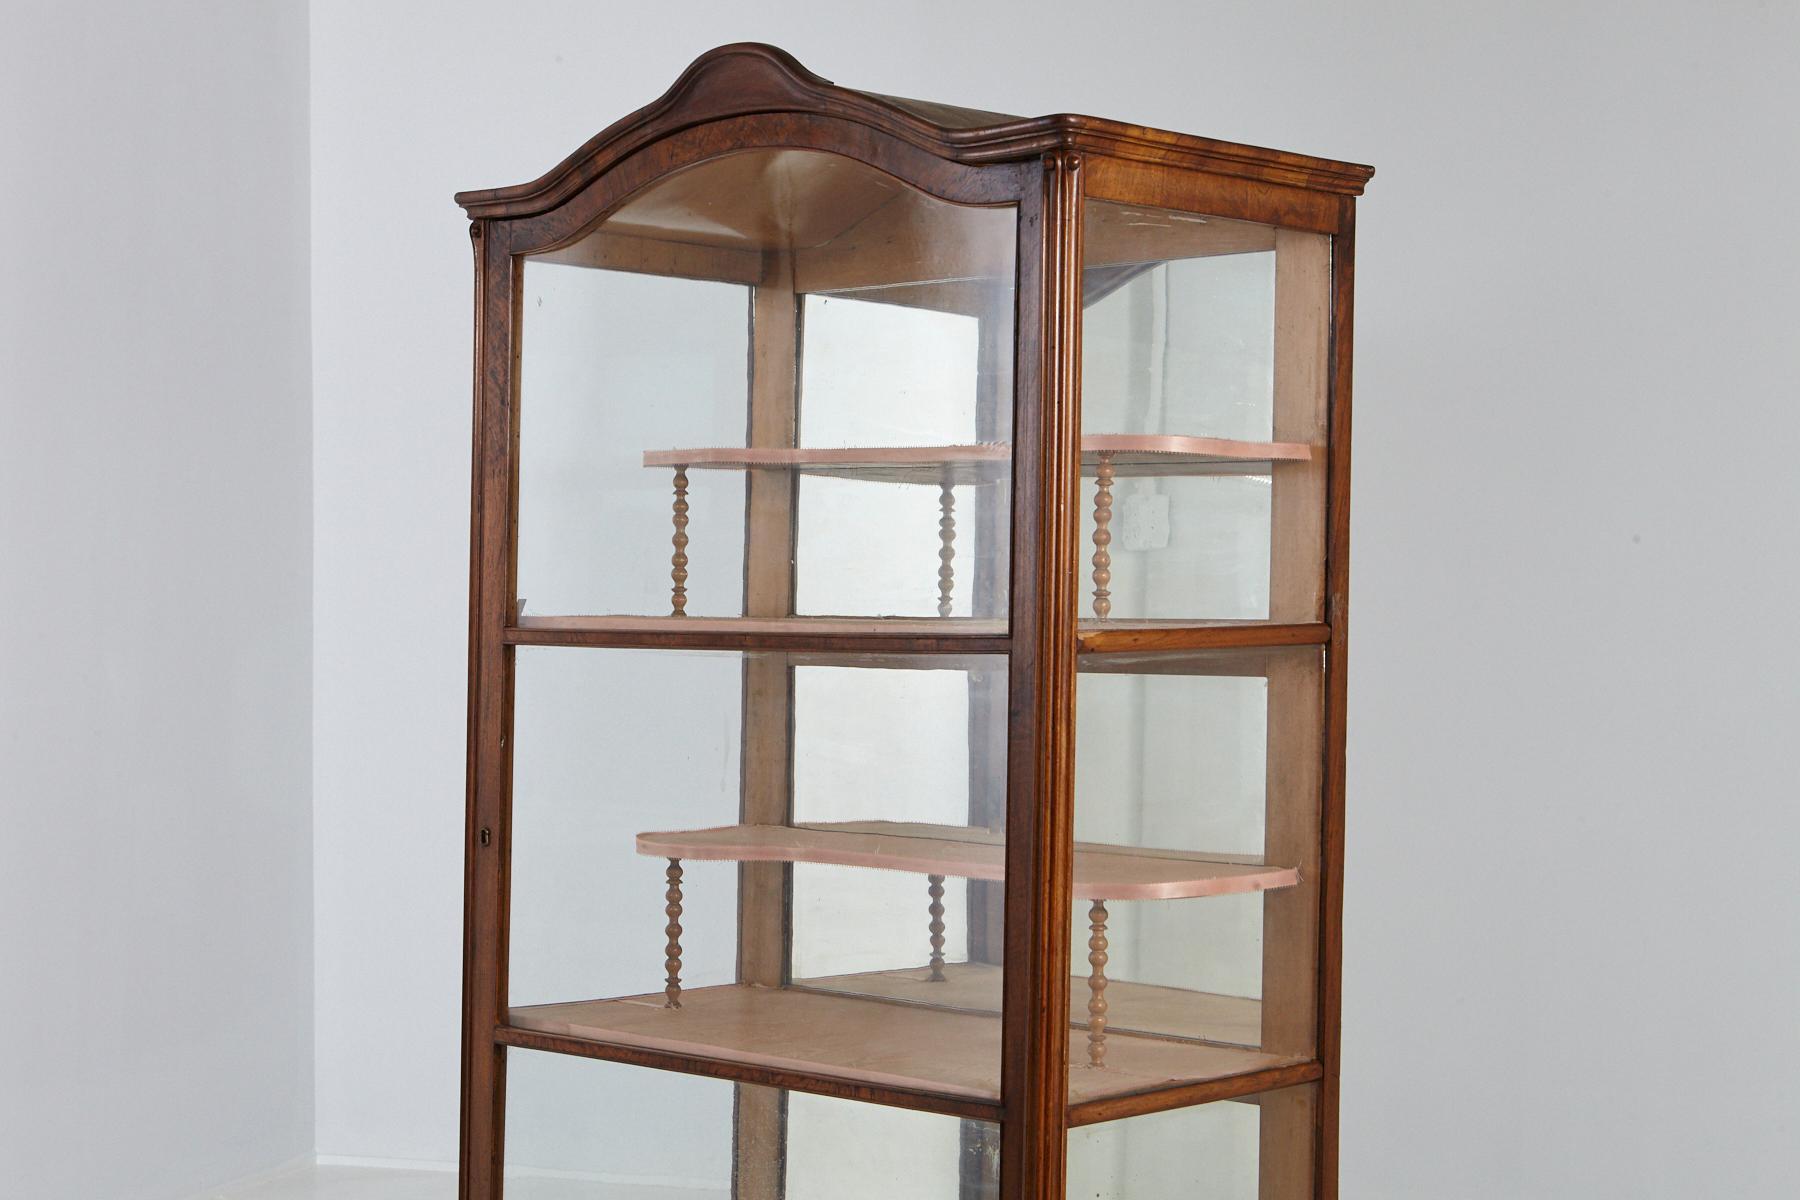 A lovely and light walnut cabinet/vitrine, with one original large glass door, glass side panels, and a mirrored back. Two large shelves with two recessed half shelves covered in fabric and a hand carved bonnet.
The key is present, just not on the